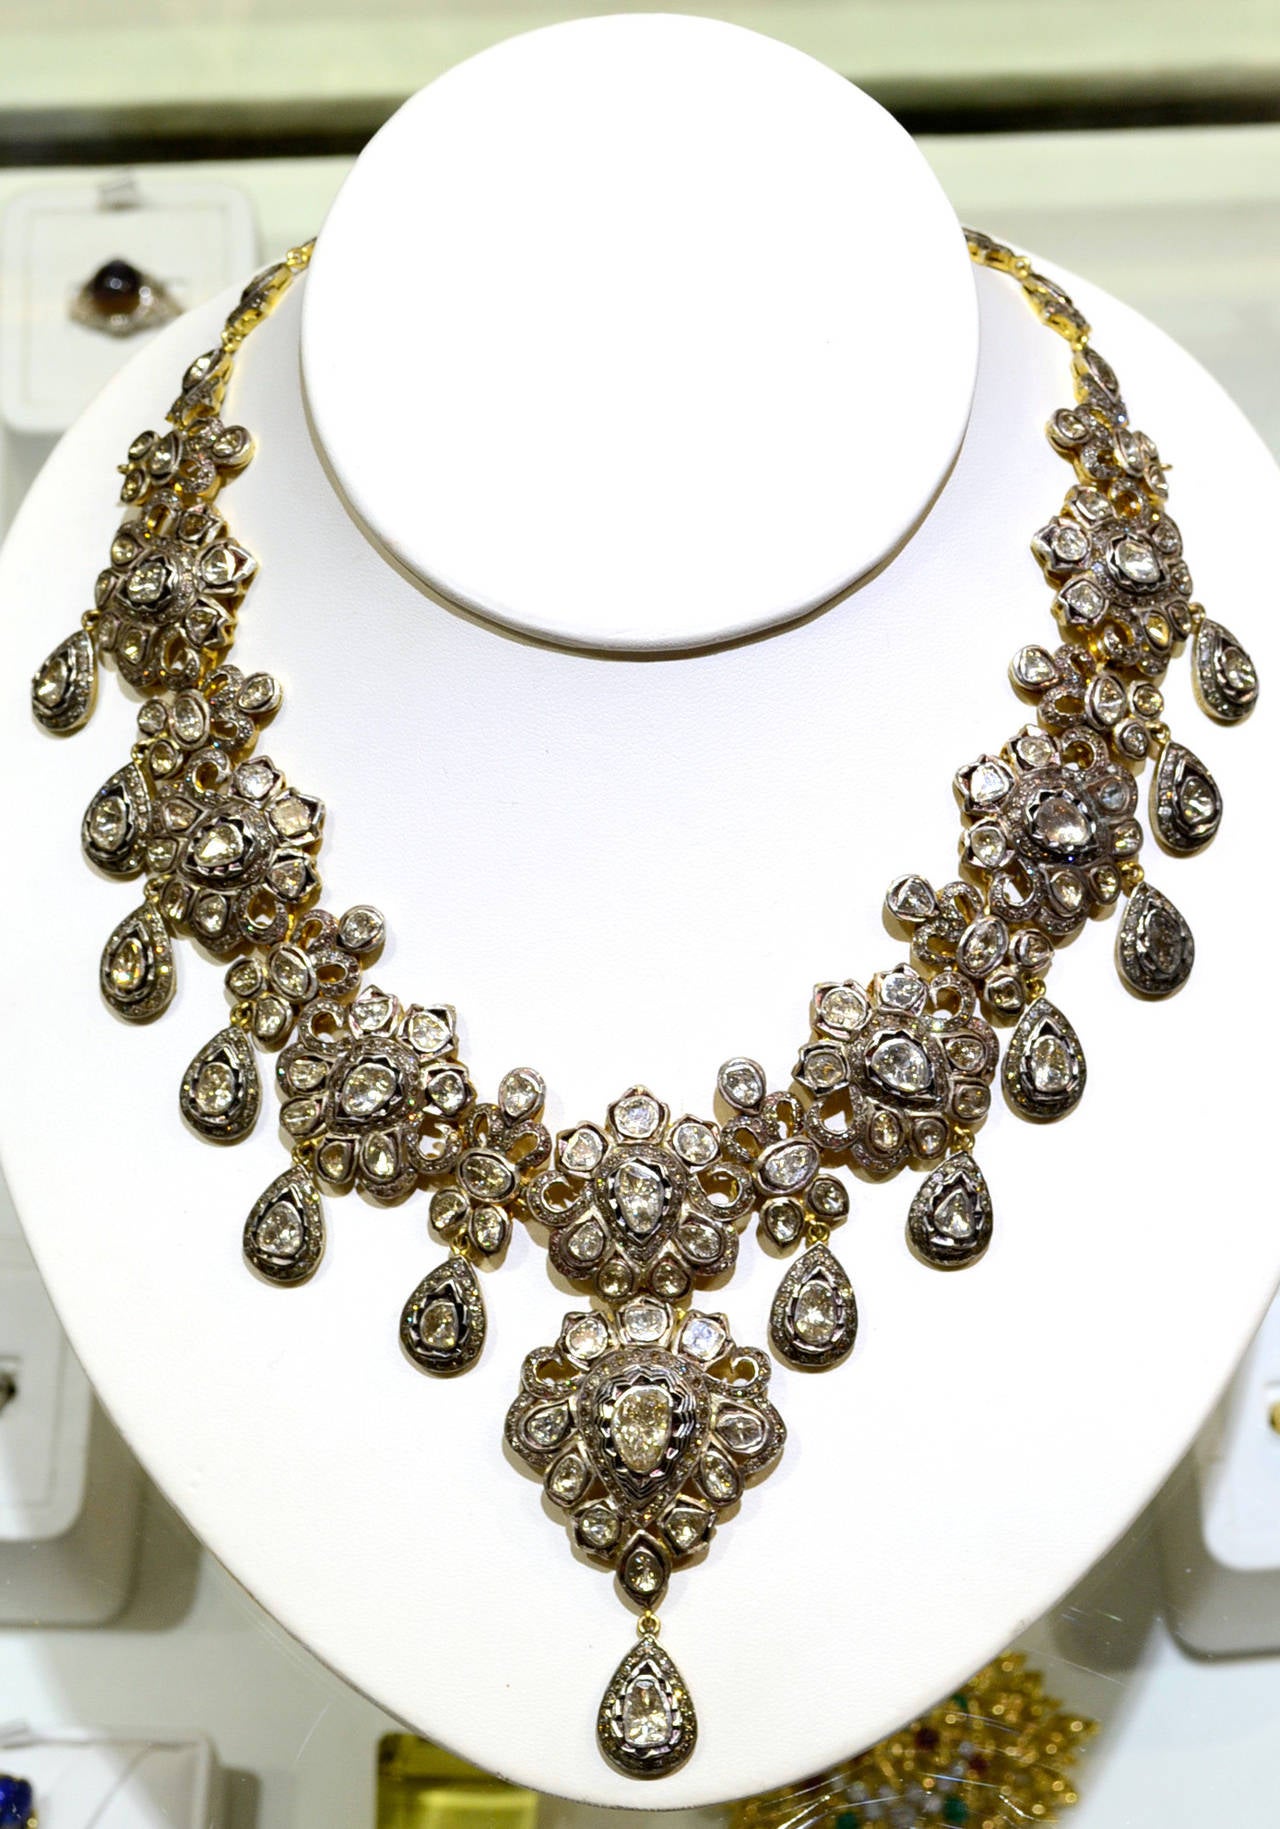 Women's Indian Rajasthani Diamond Necklace and Earrings For Sale